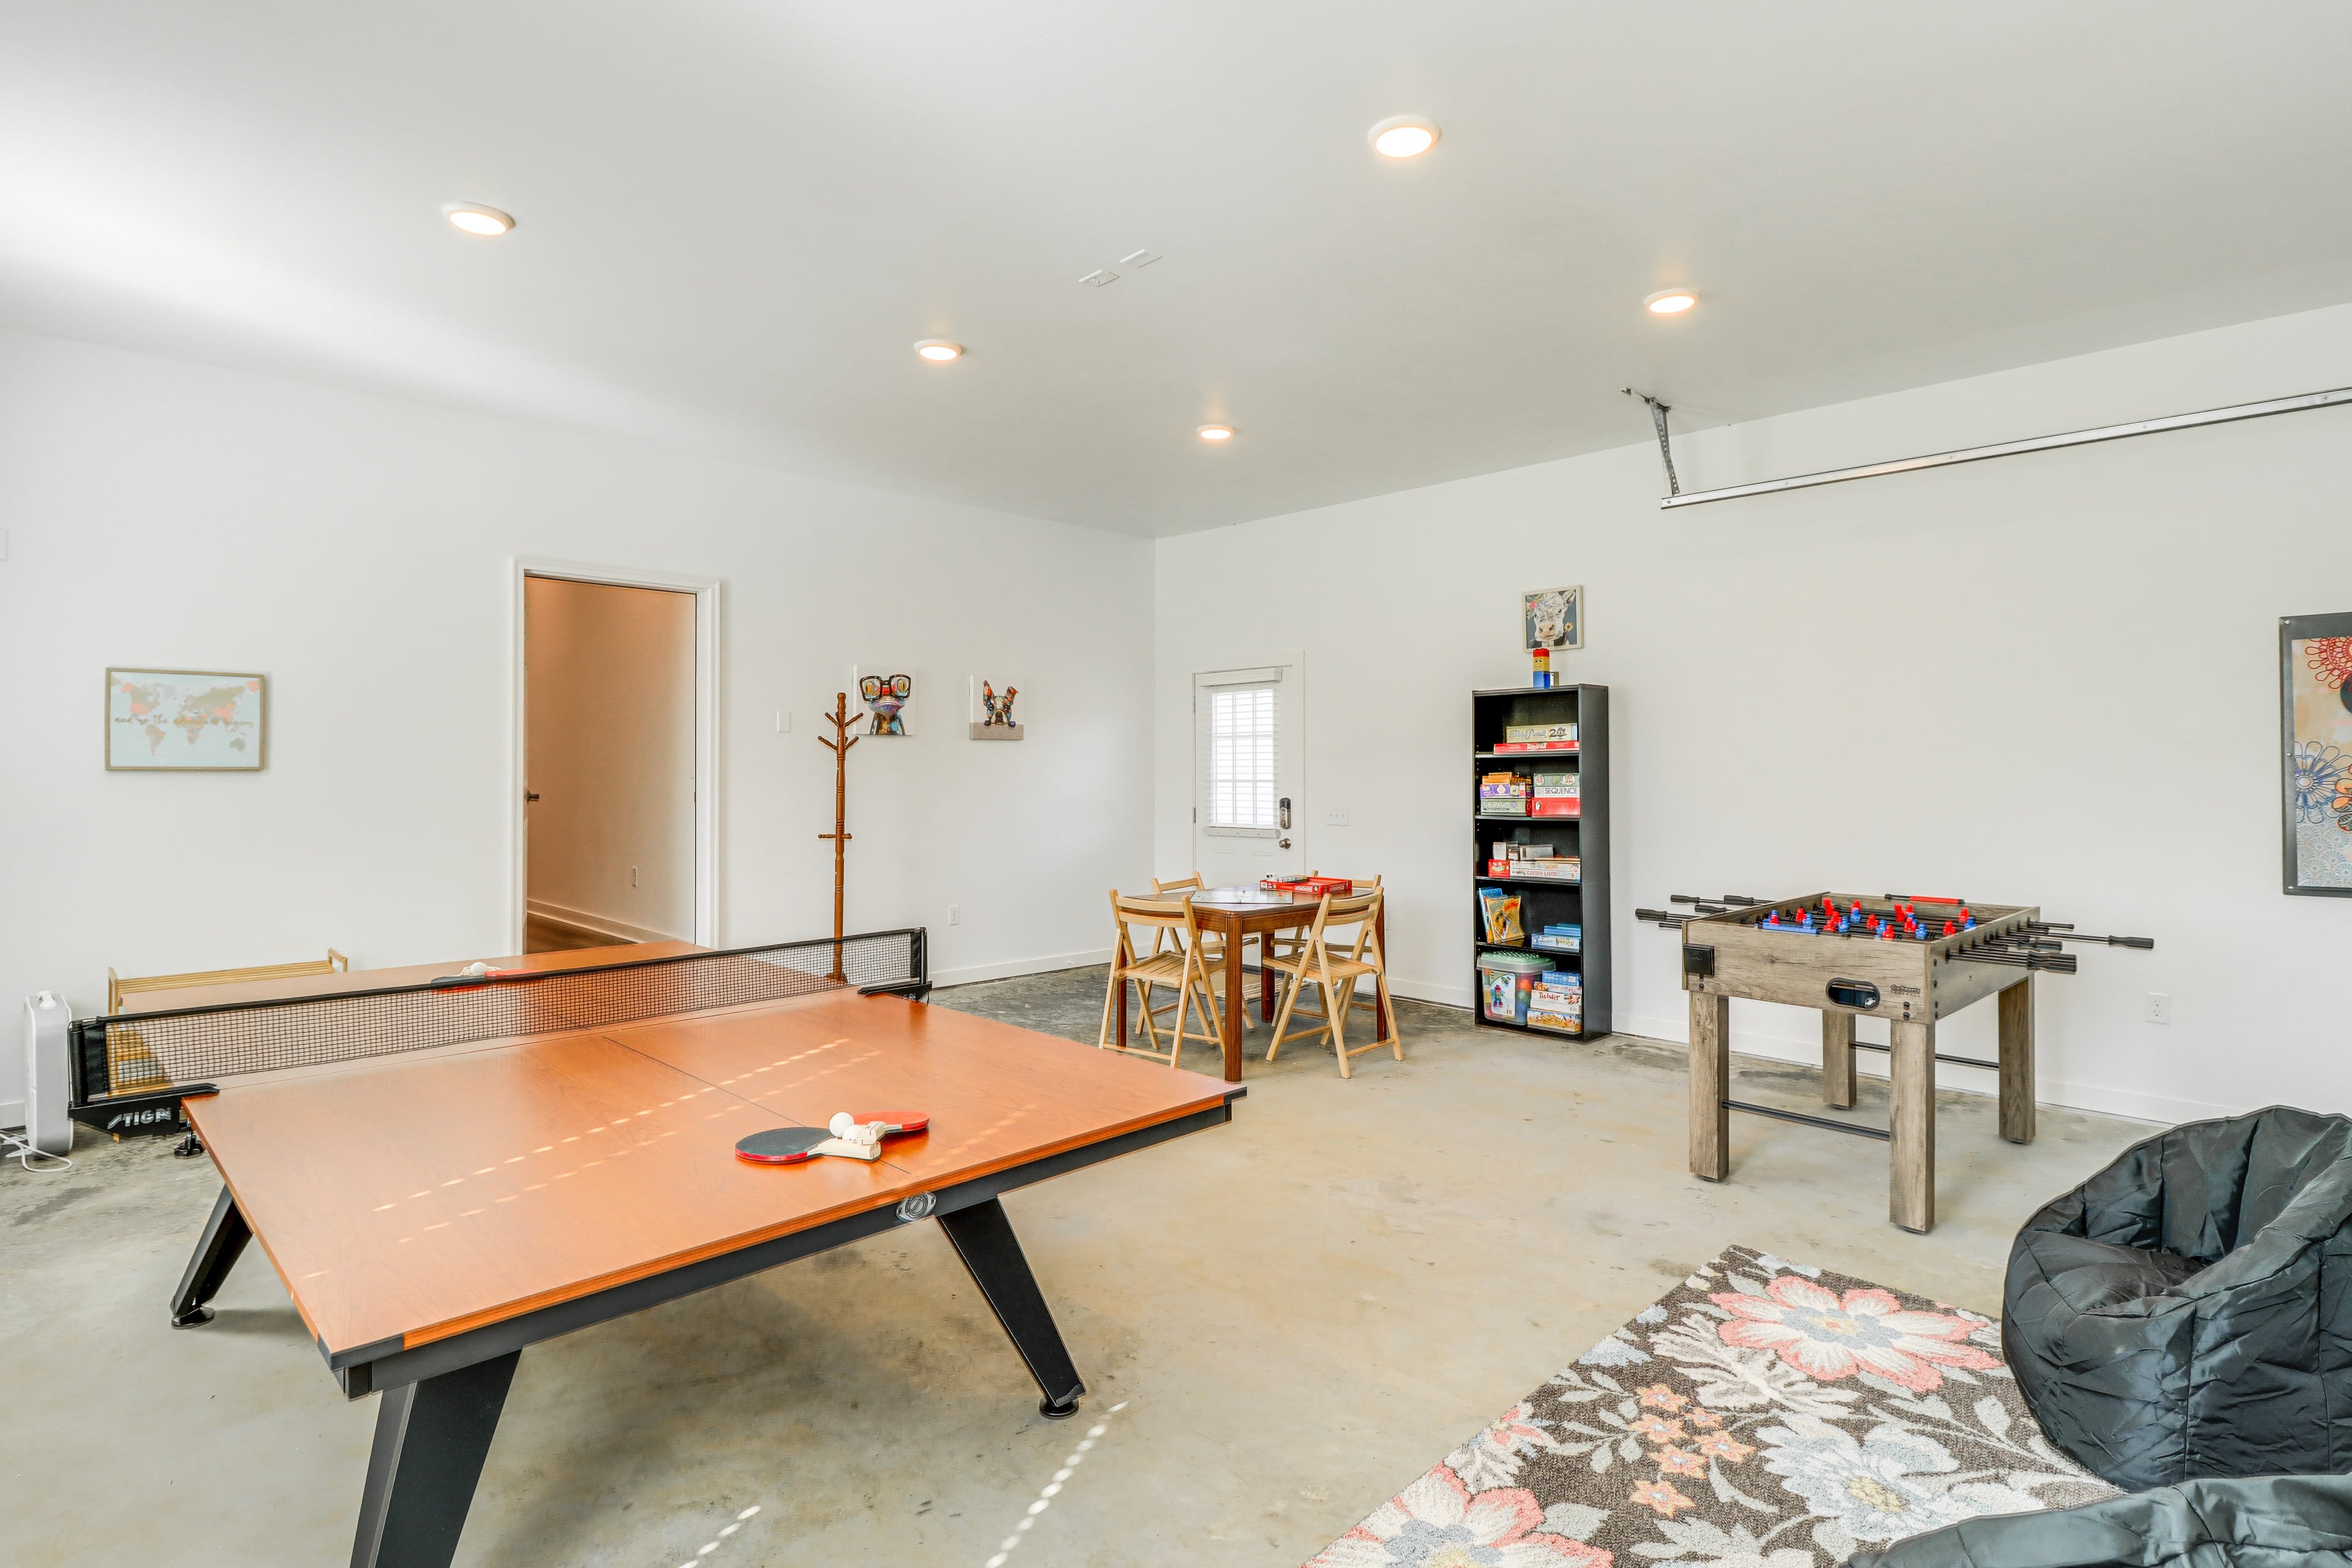 Game Room/Garage | Ping-Pong Table | Foosball Table | Board Games